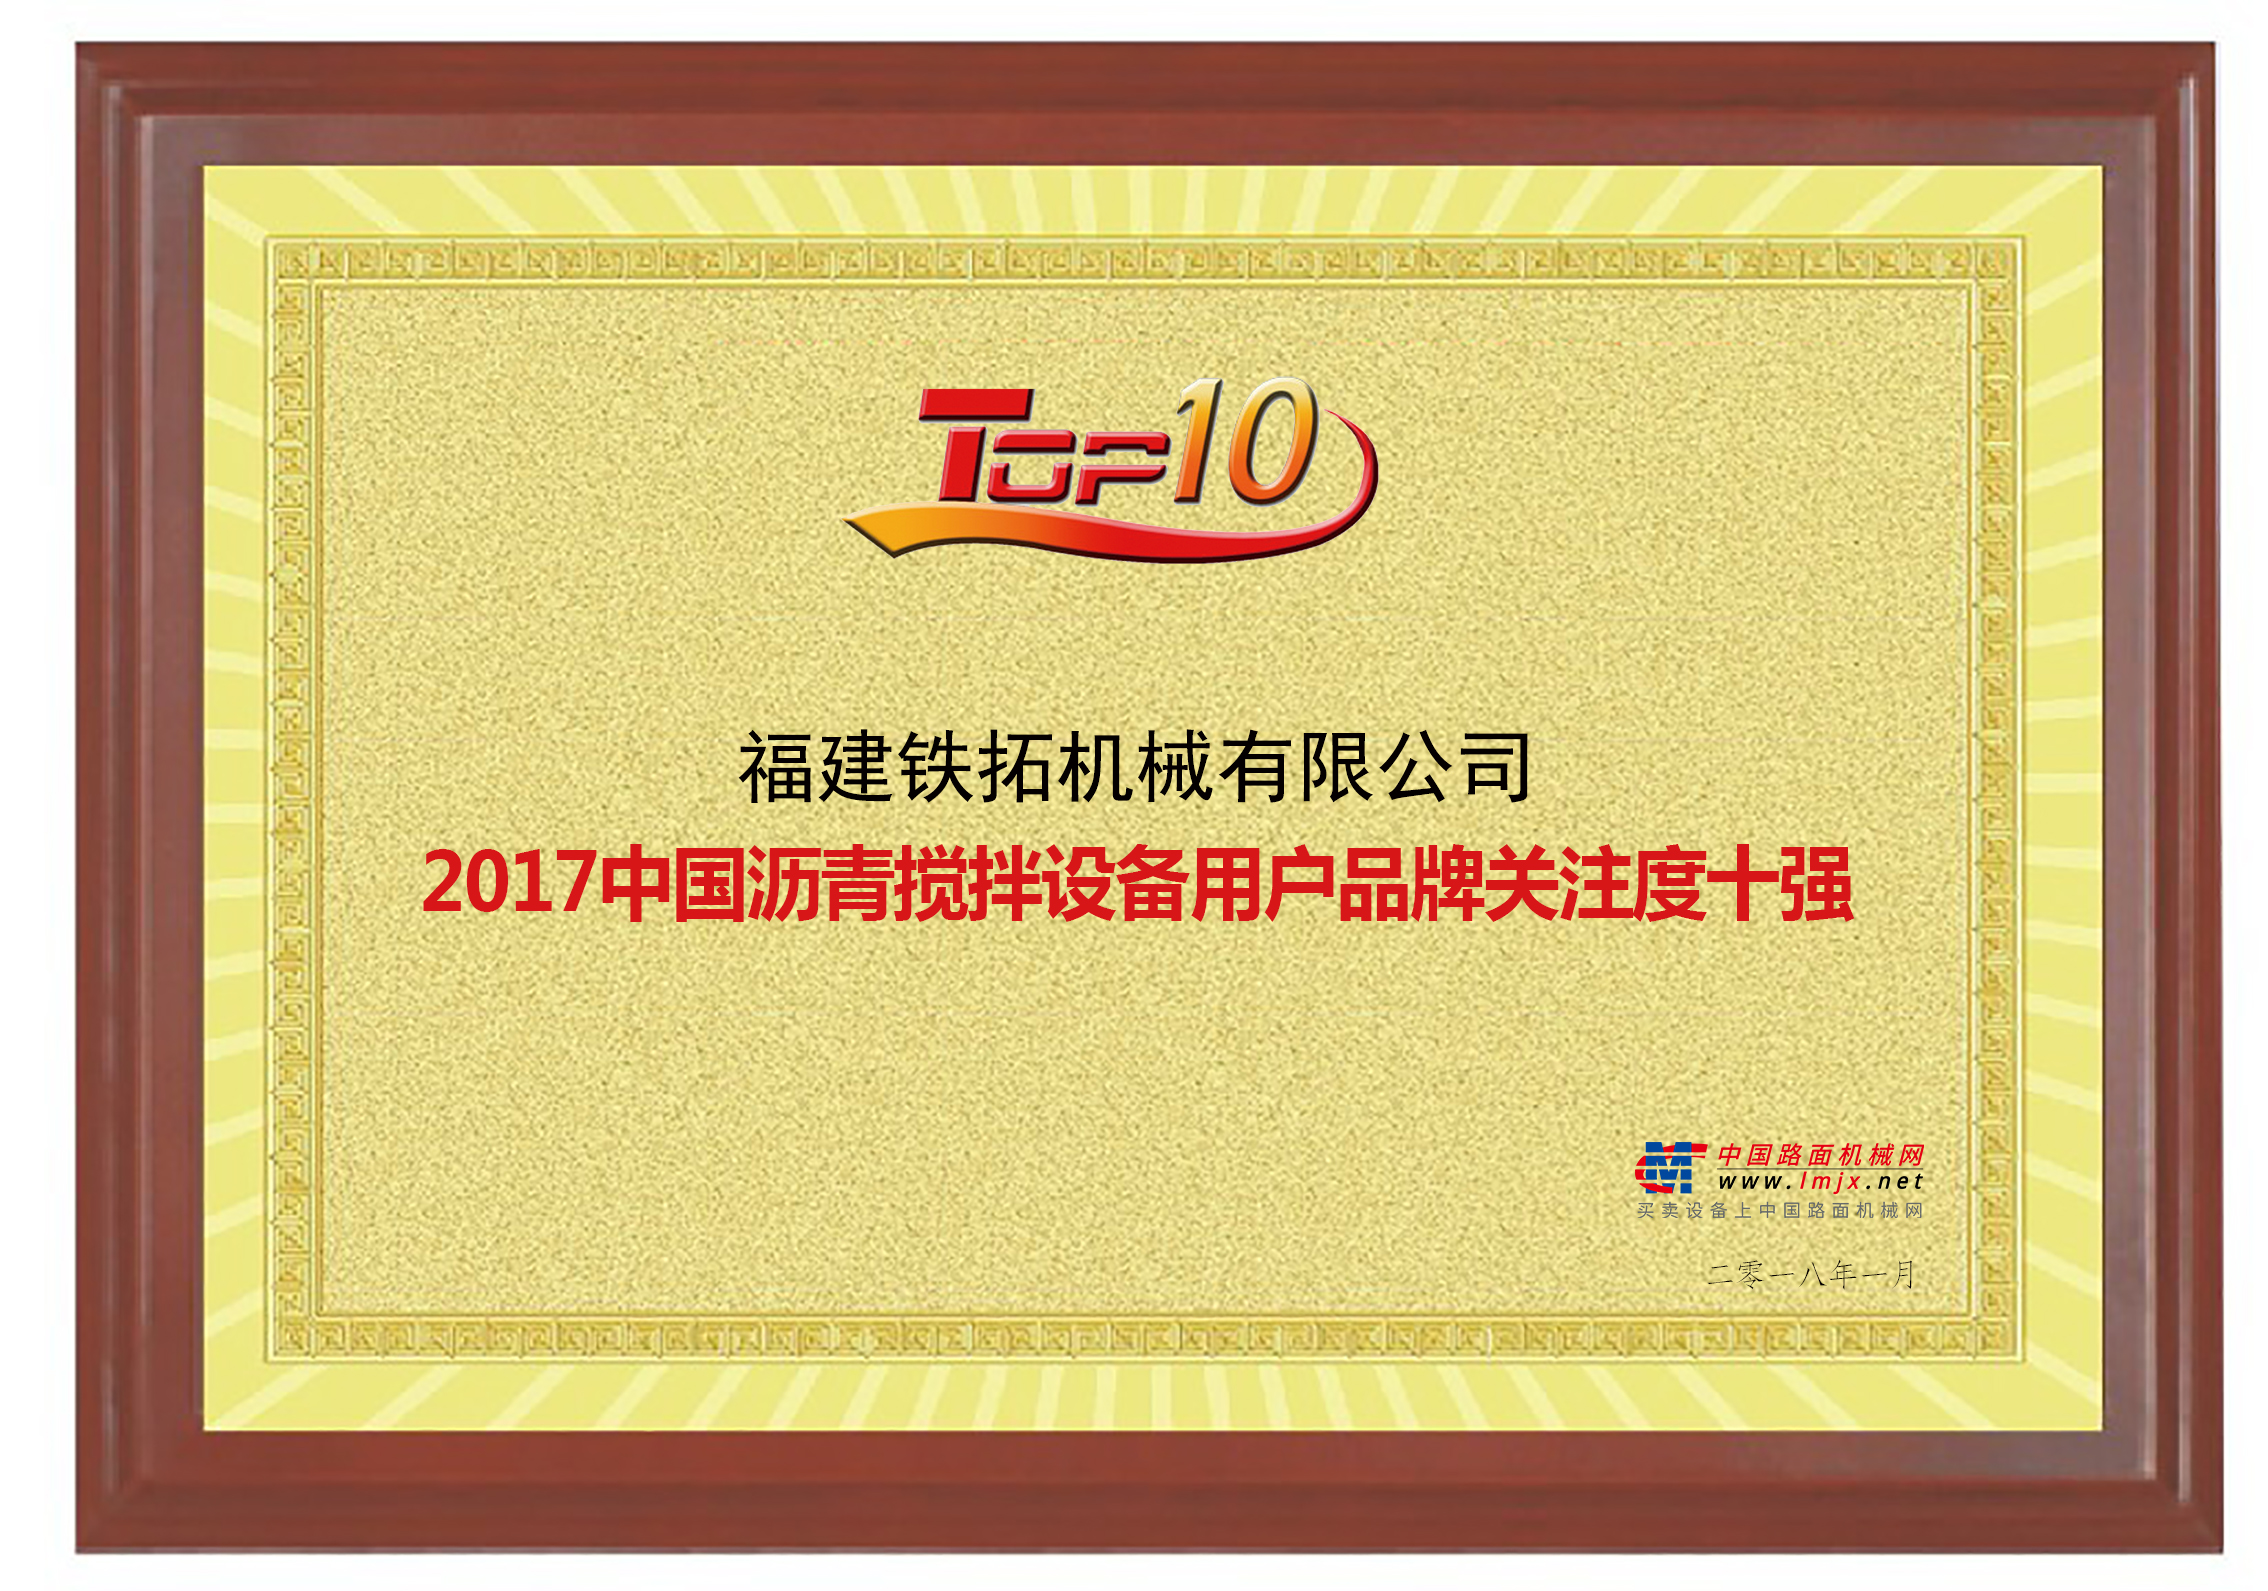 TTM Once Again Topped the List of “ China’s Top 10 Asphalt Mixing Plant Brand in 2017”